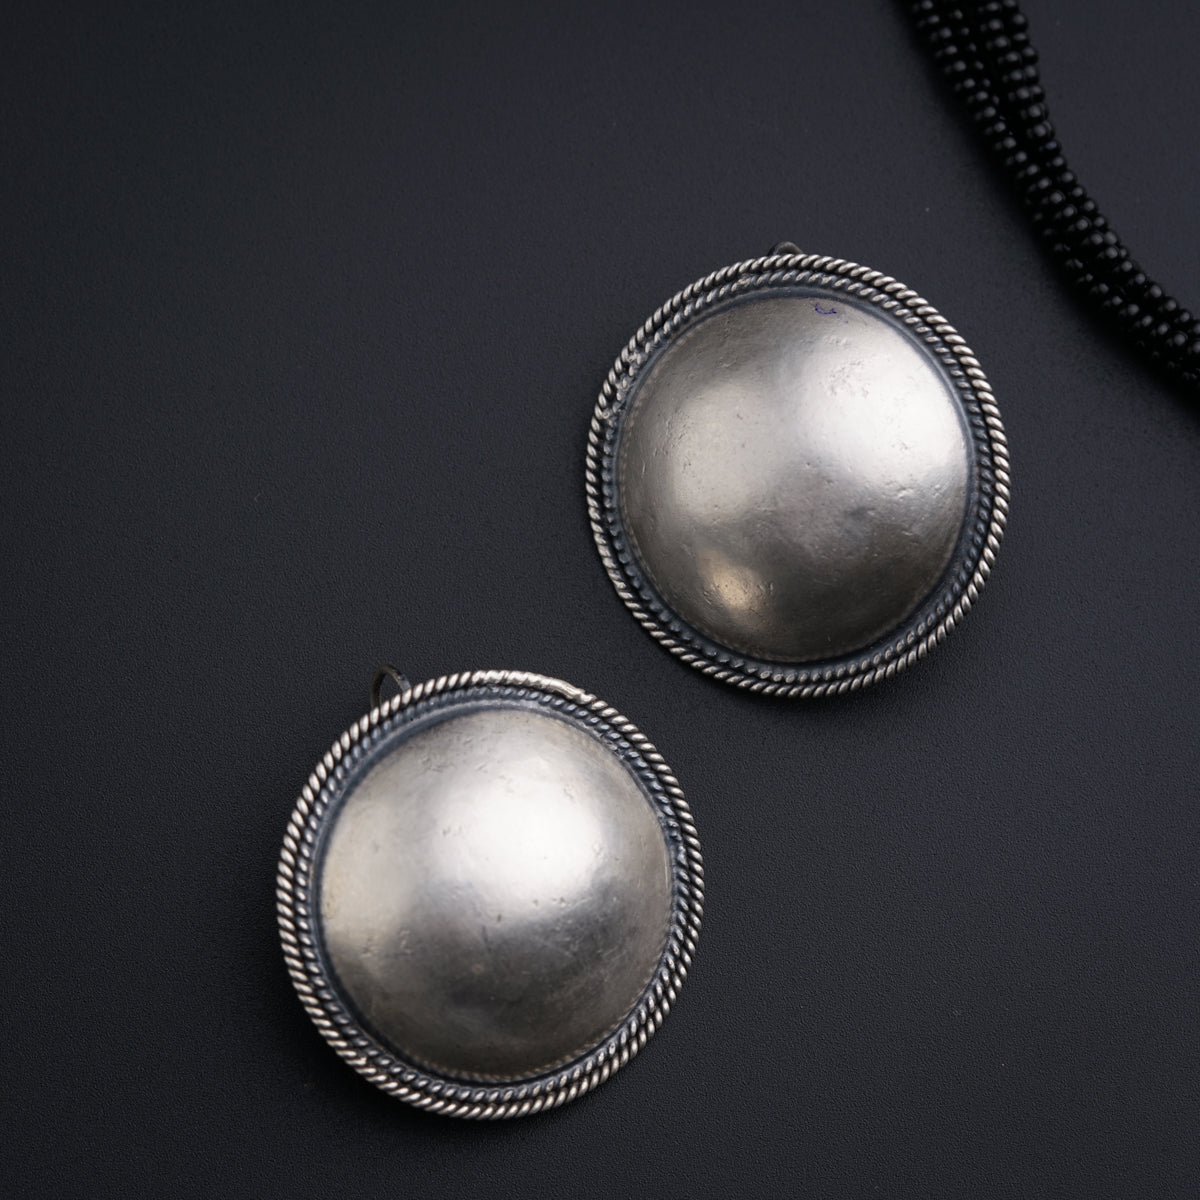 a pair of silver buttons sitting on top of a black surface